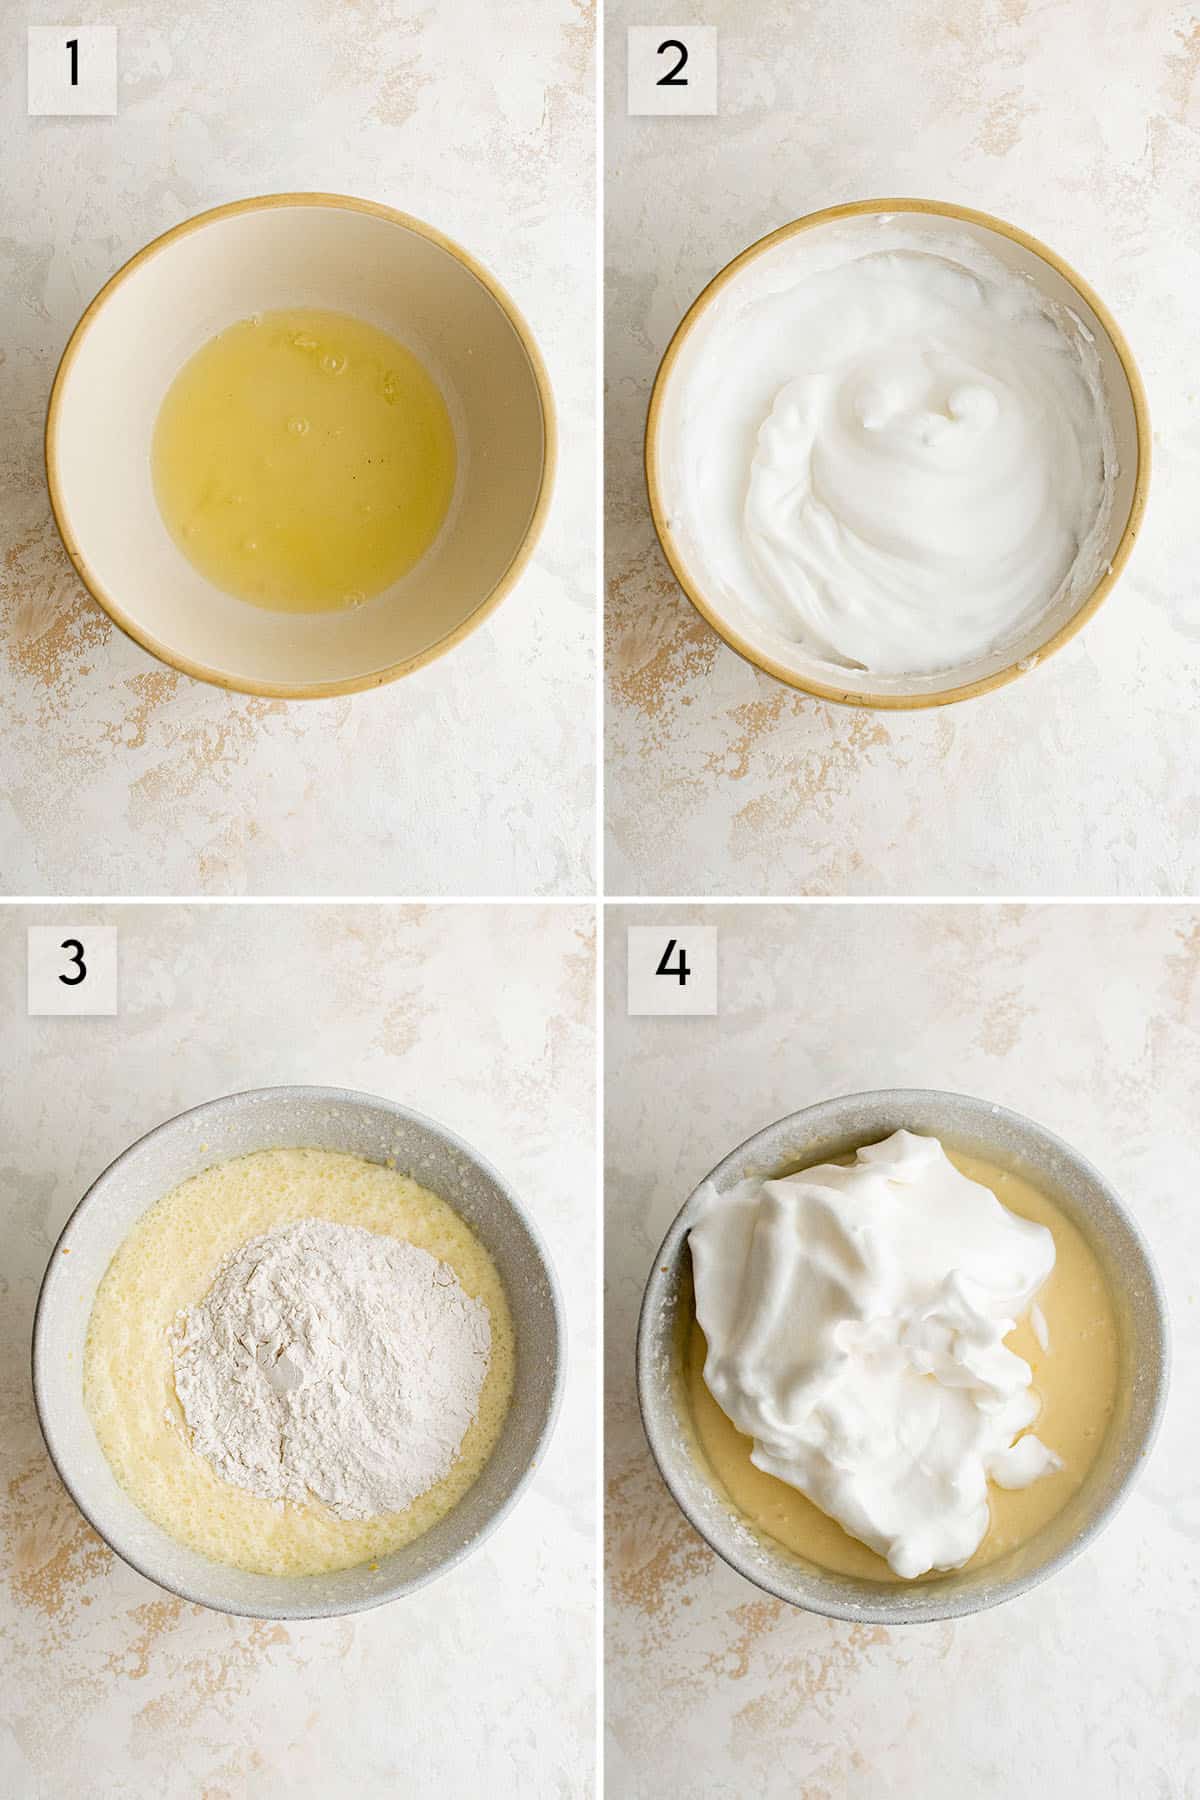  Four picture collage image outlining the steps to prepare a lemon custard cake.